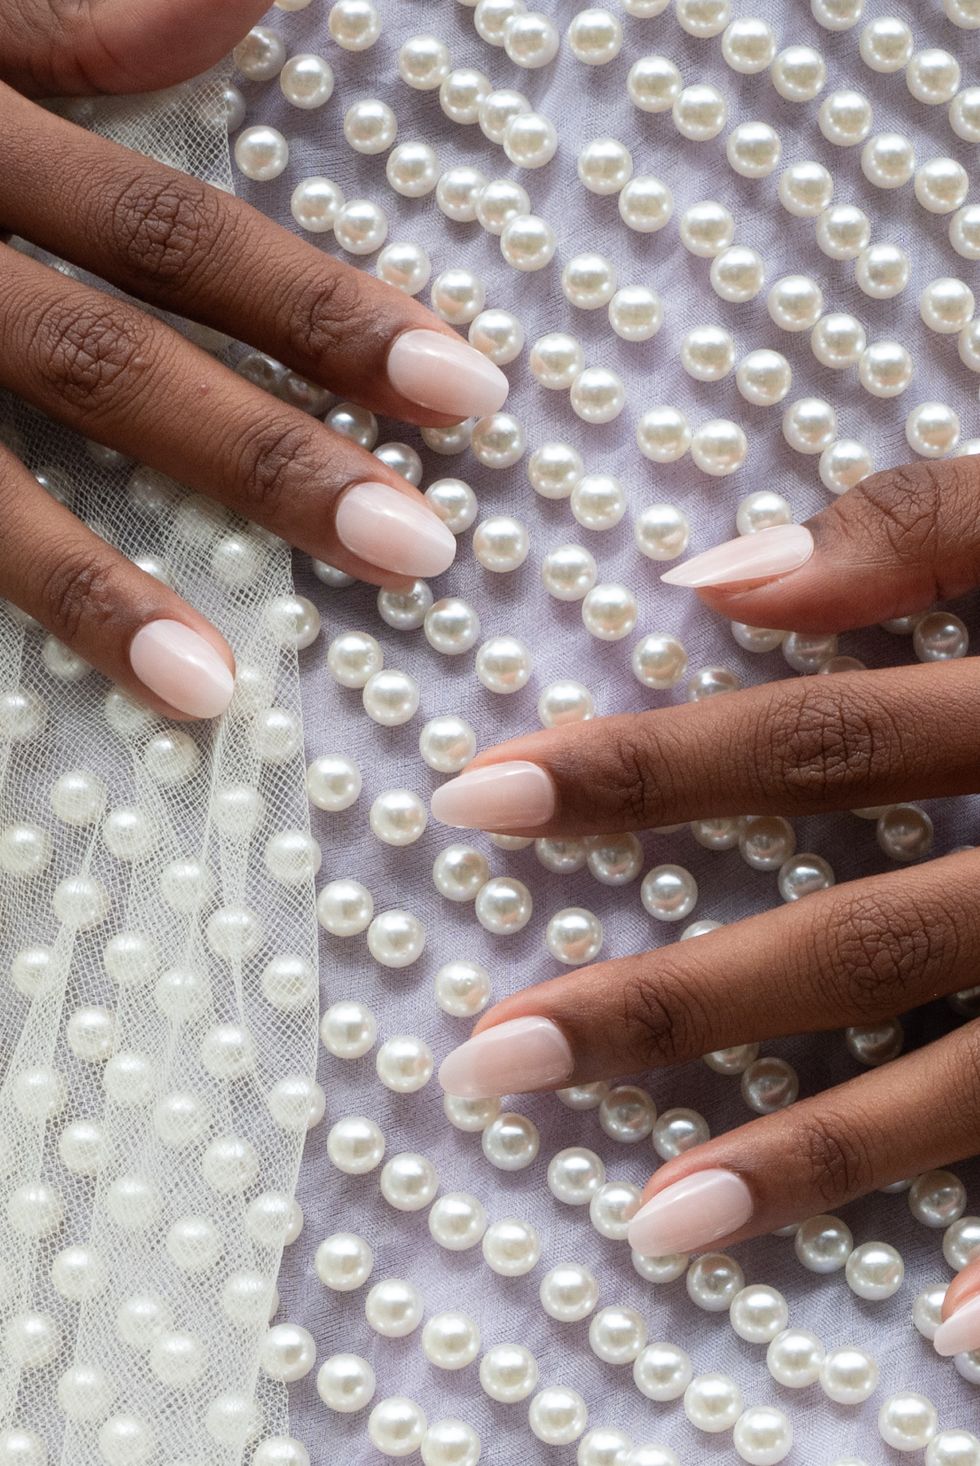 7 Nail Trends We're Forecasting for 2019